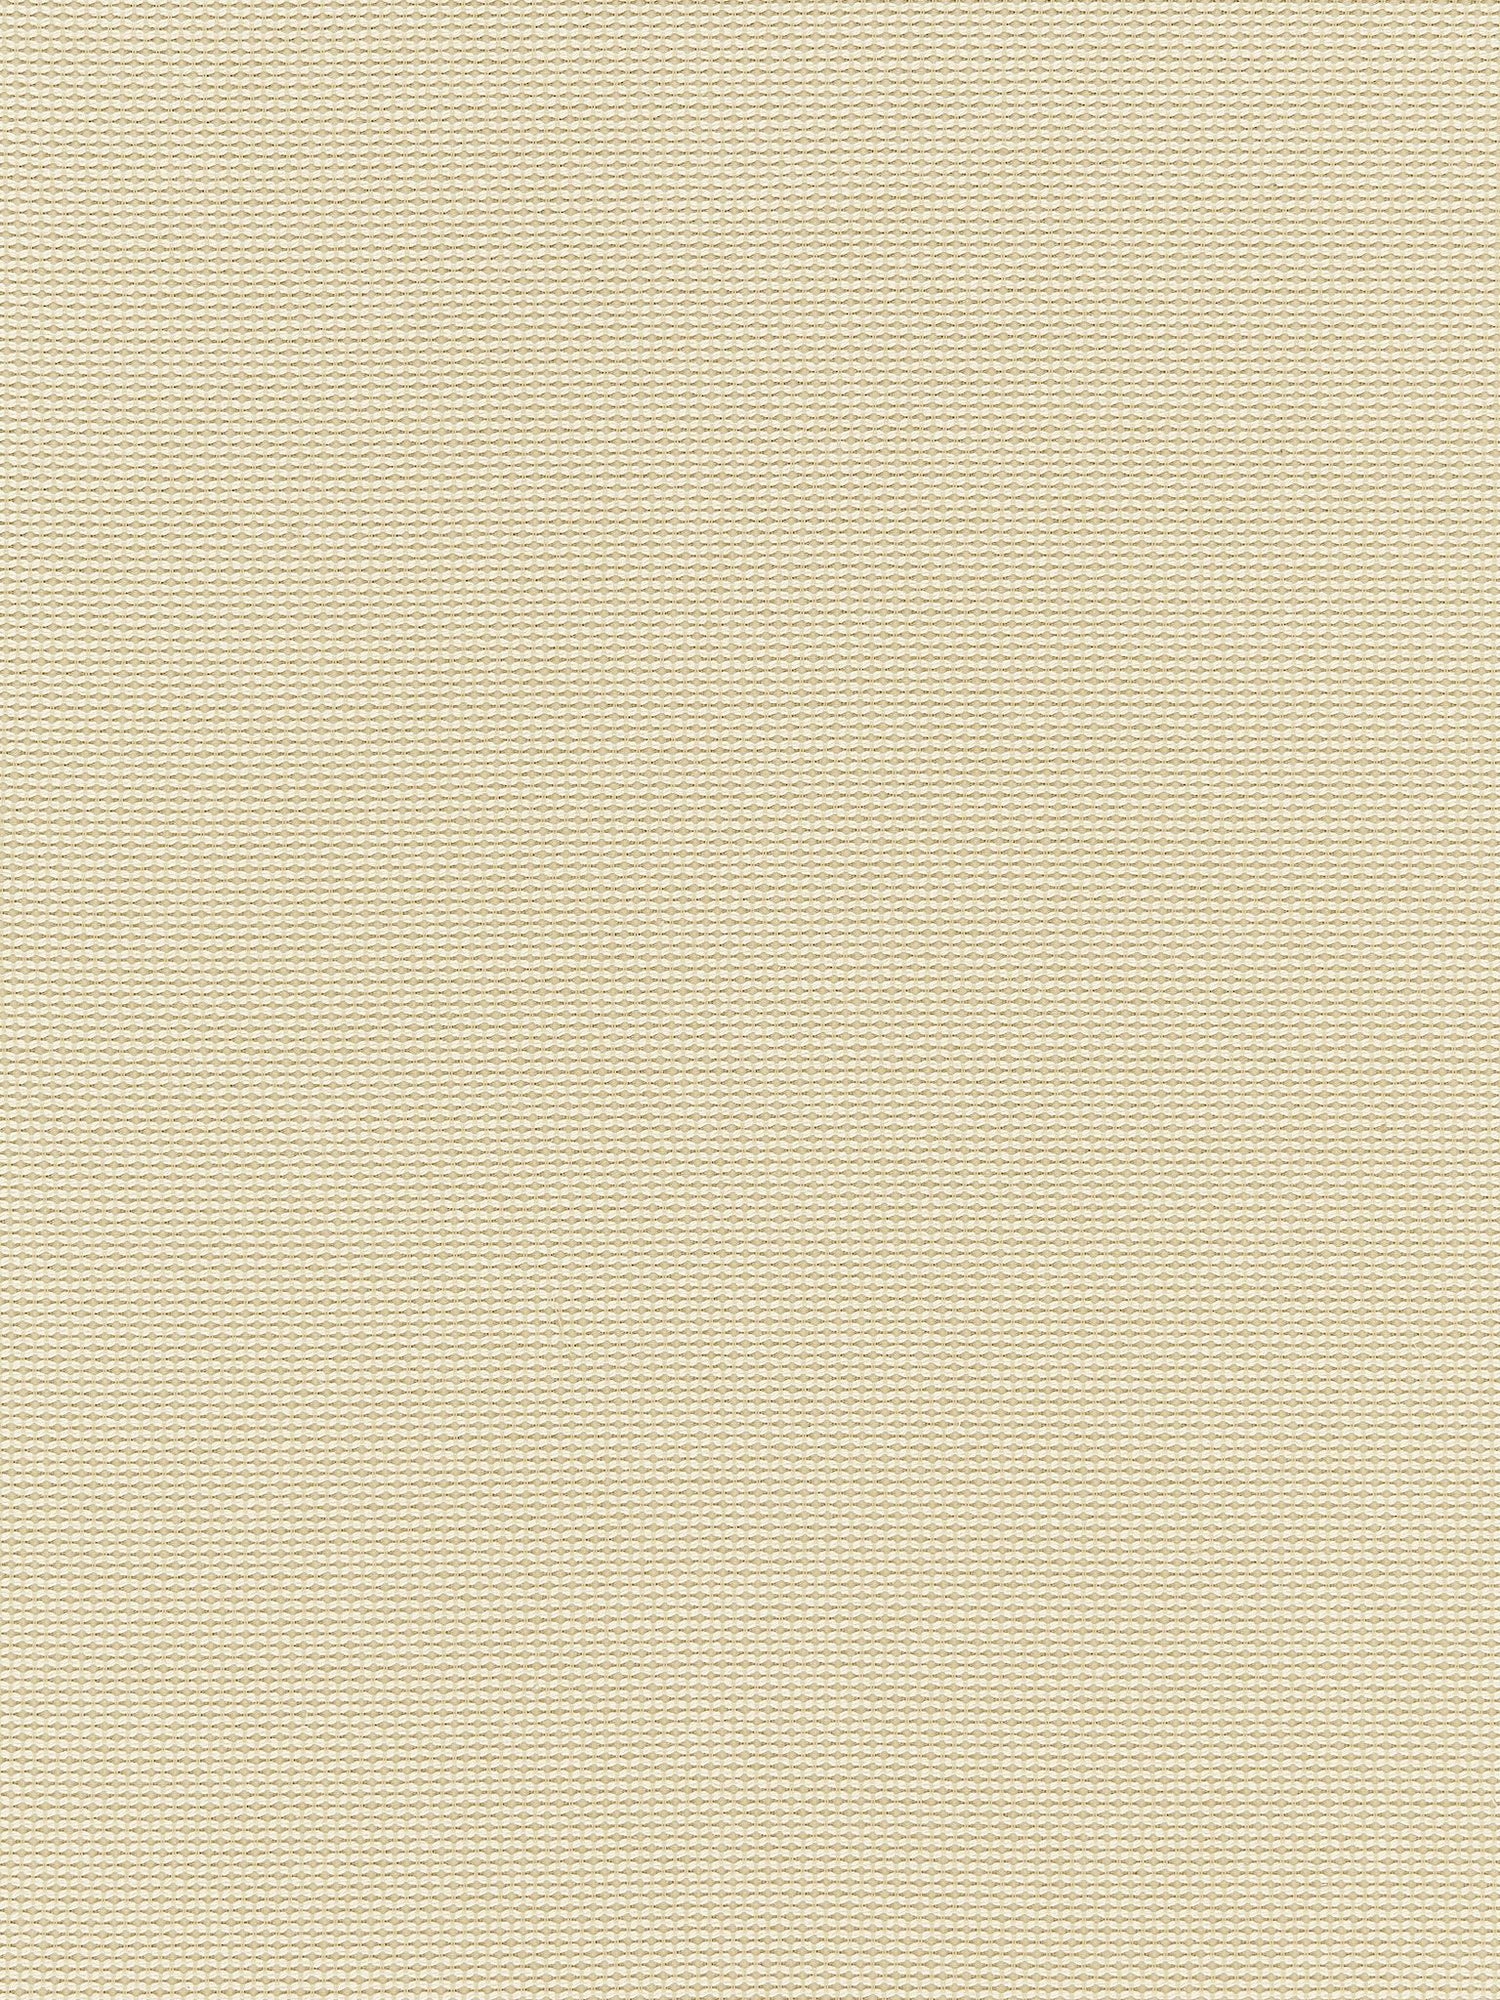 Cortland Weave fabric in sand color - pattern number BK 0002K65119 - by Scalamandre in the Old World Weavers collection